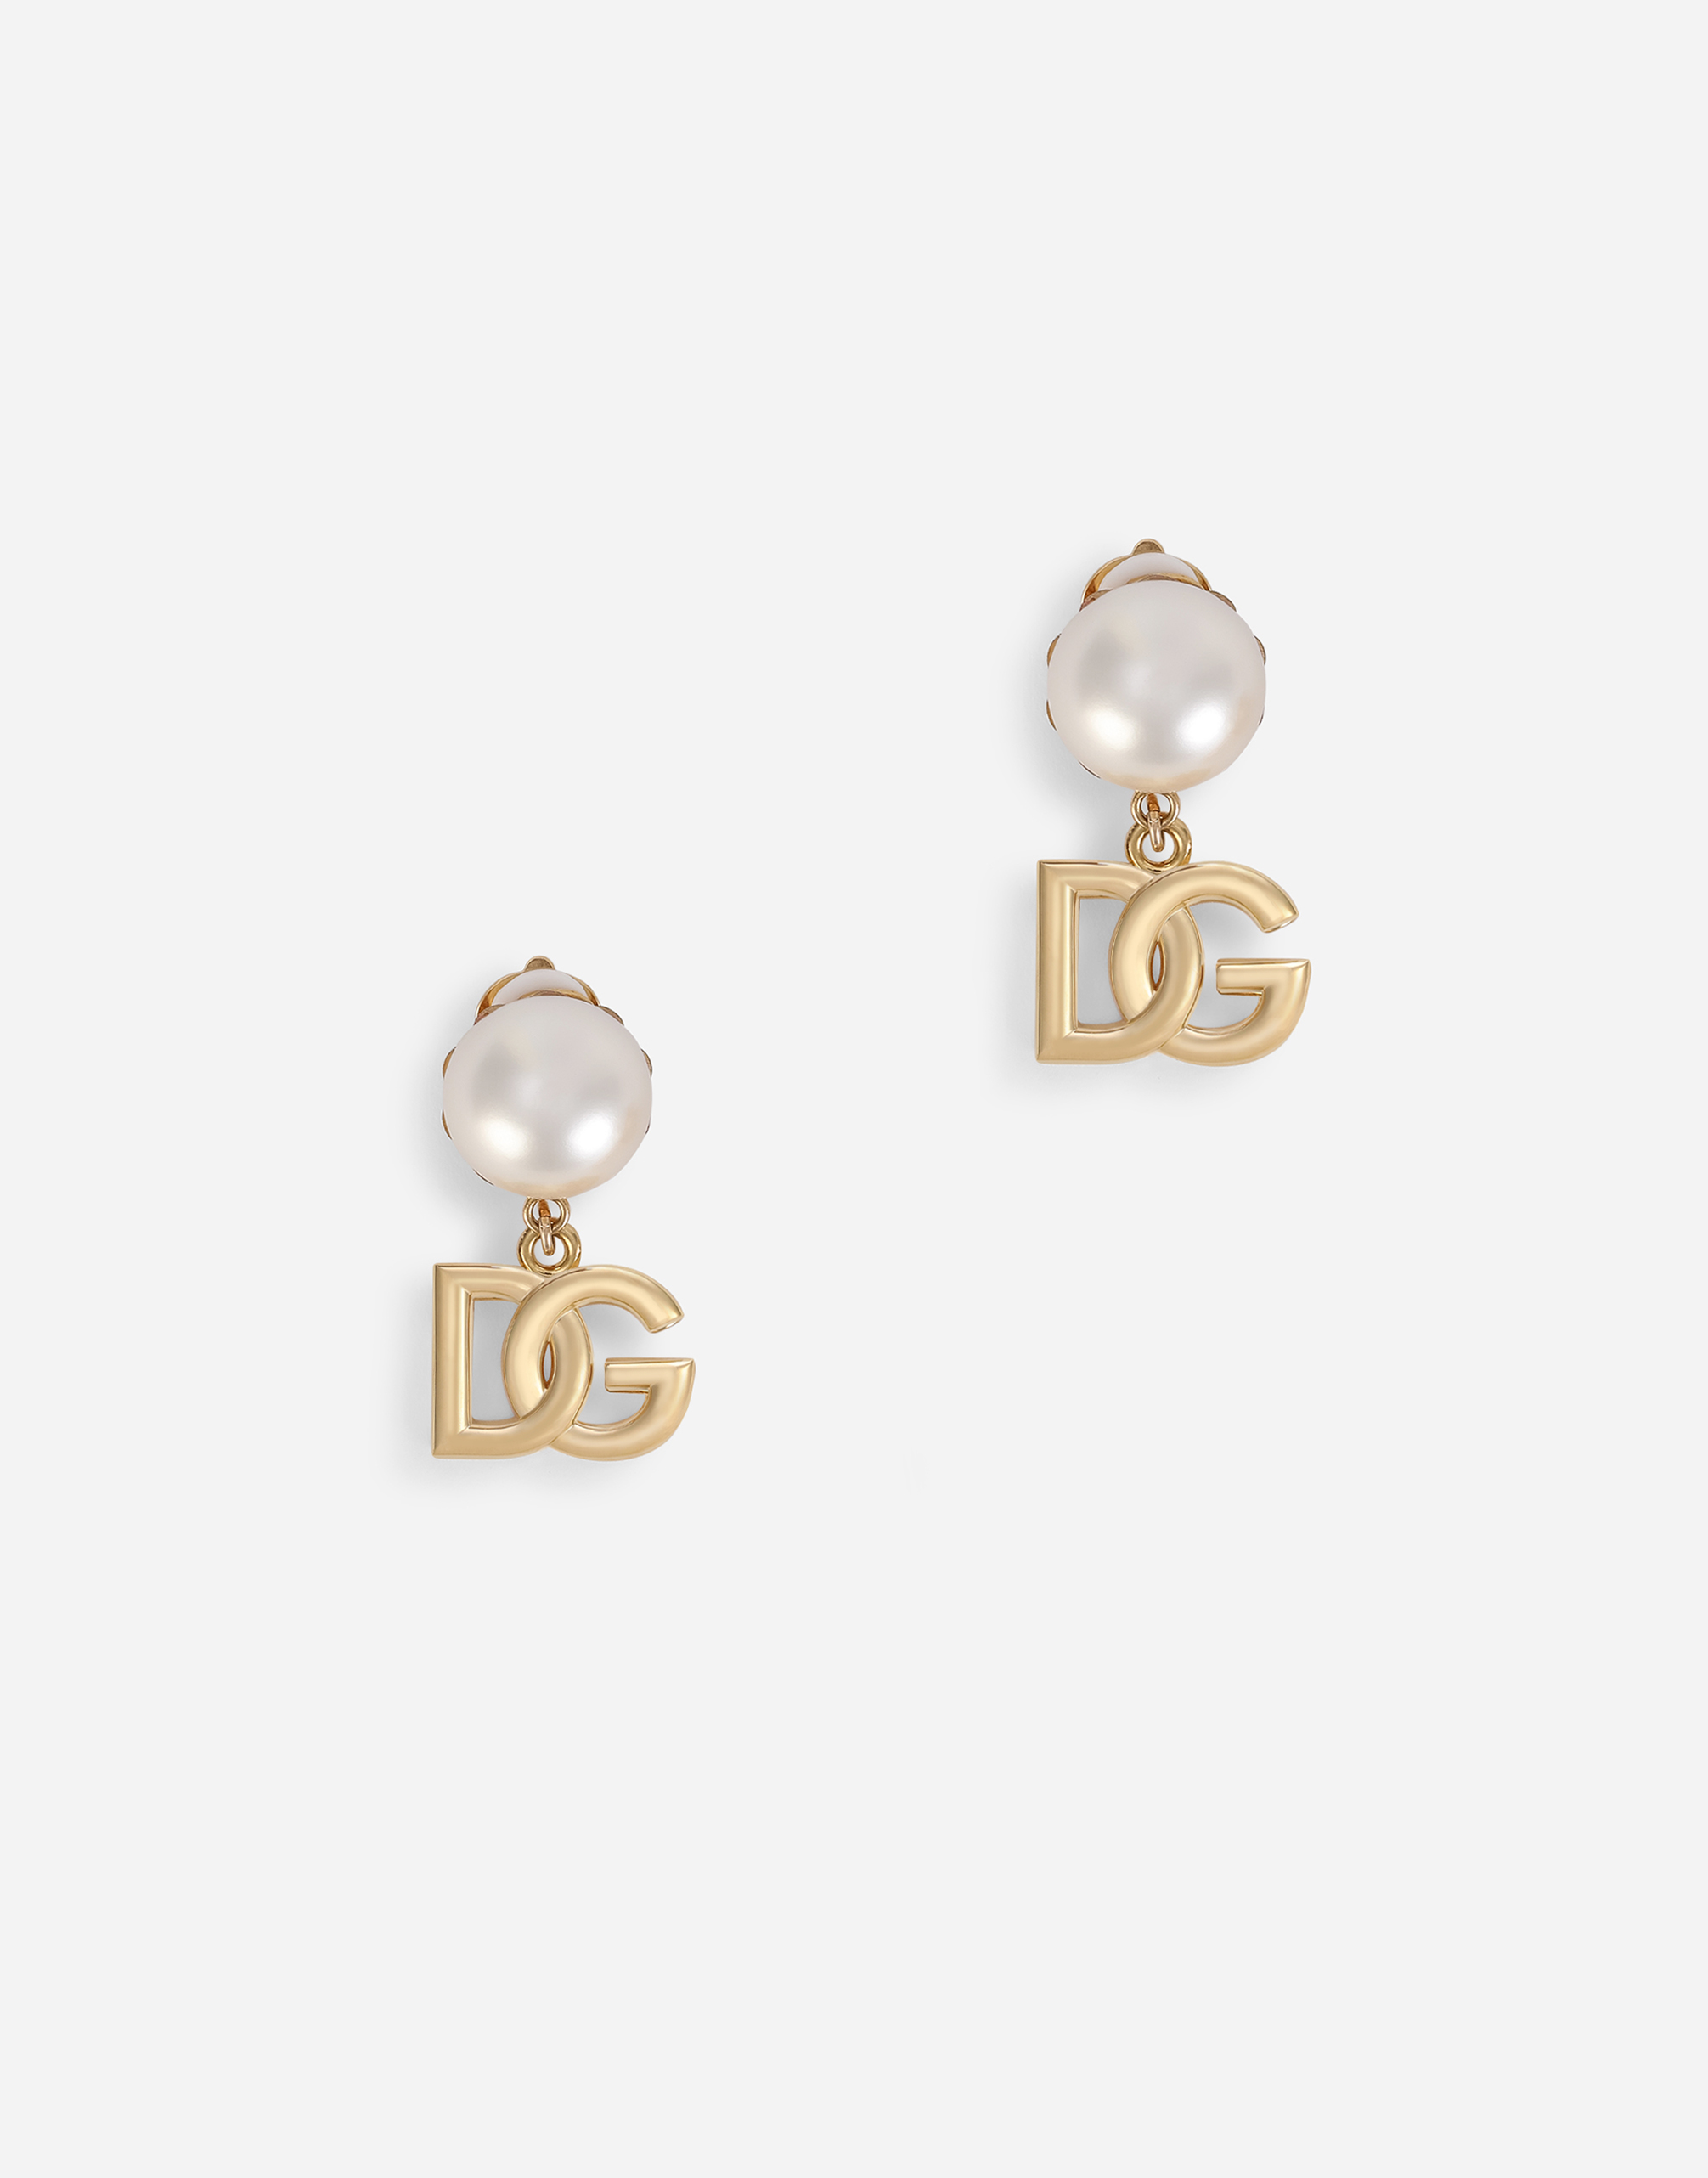 Clip-on earrings with pearls and DG logo pendants in Gold